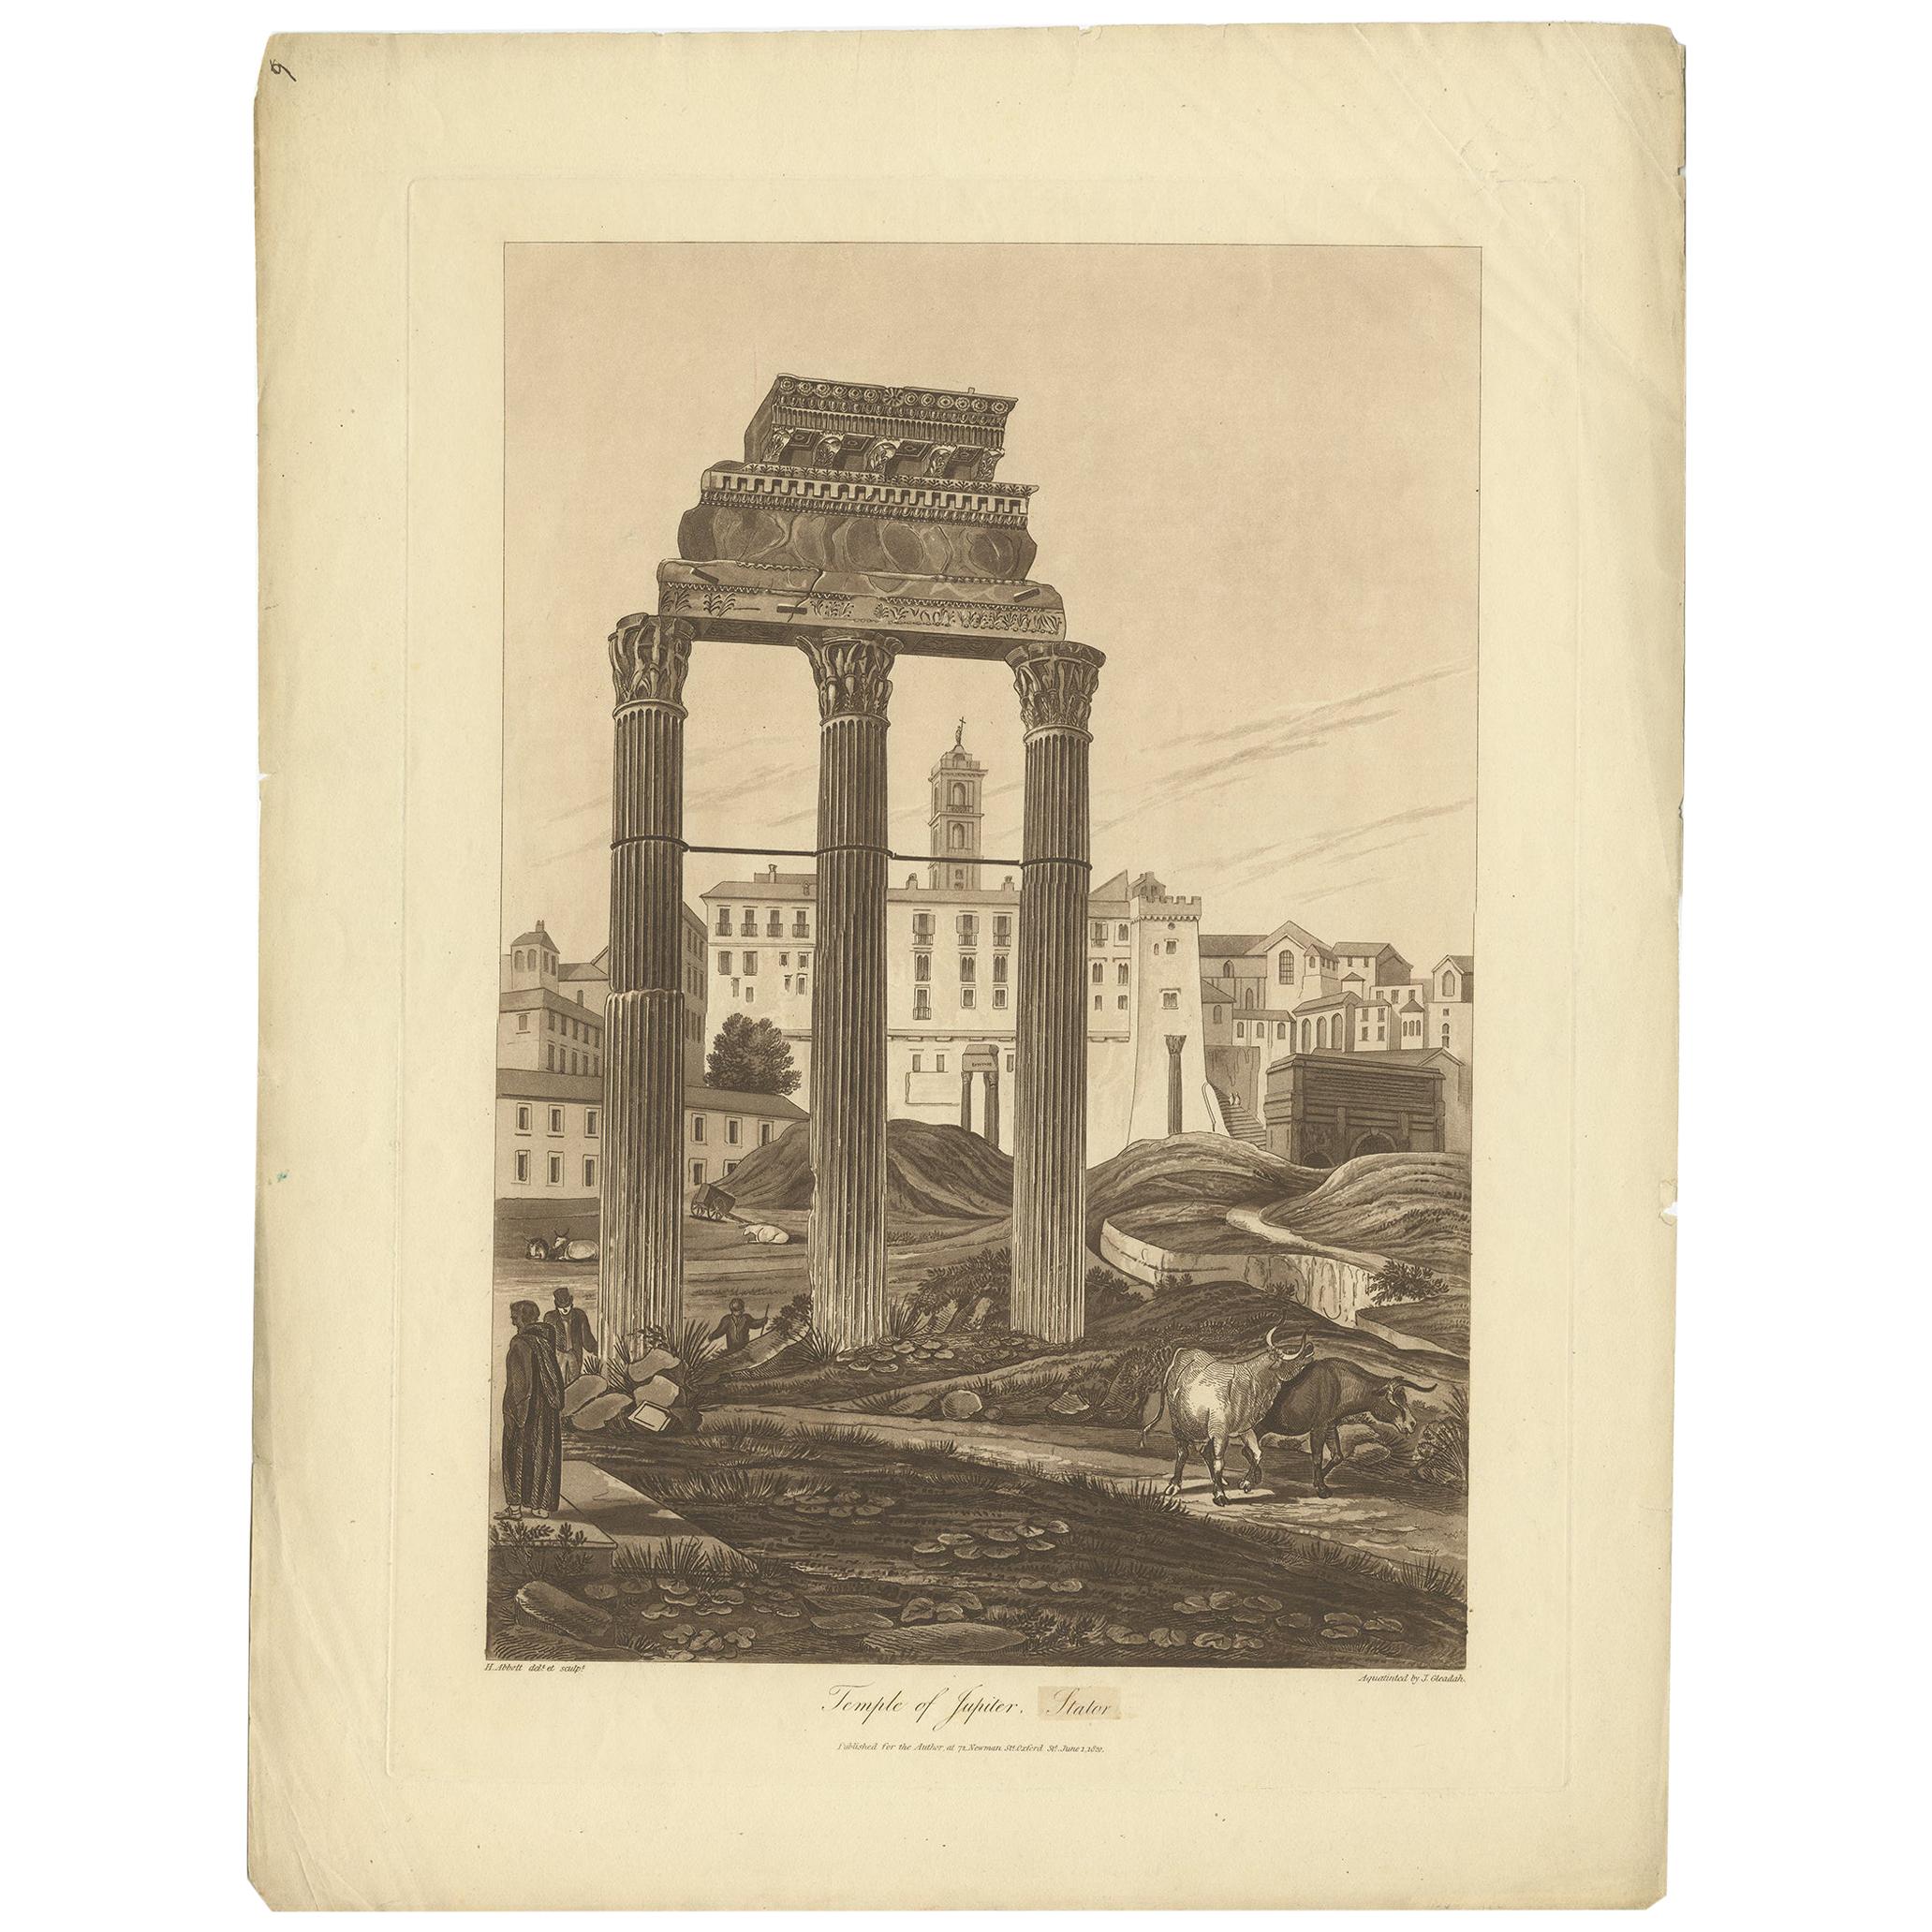 Antique Print of the Temple of Jupiter Stator by Abbot, 1820